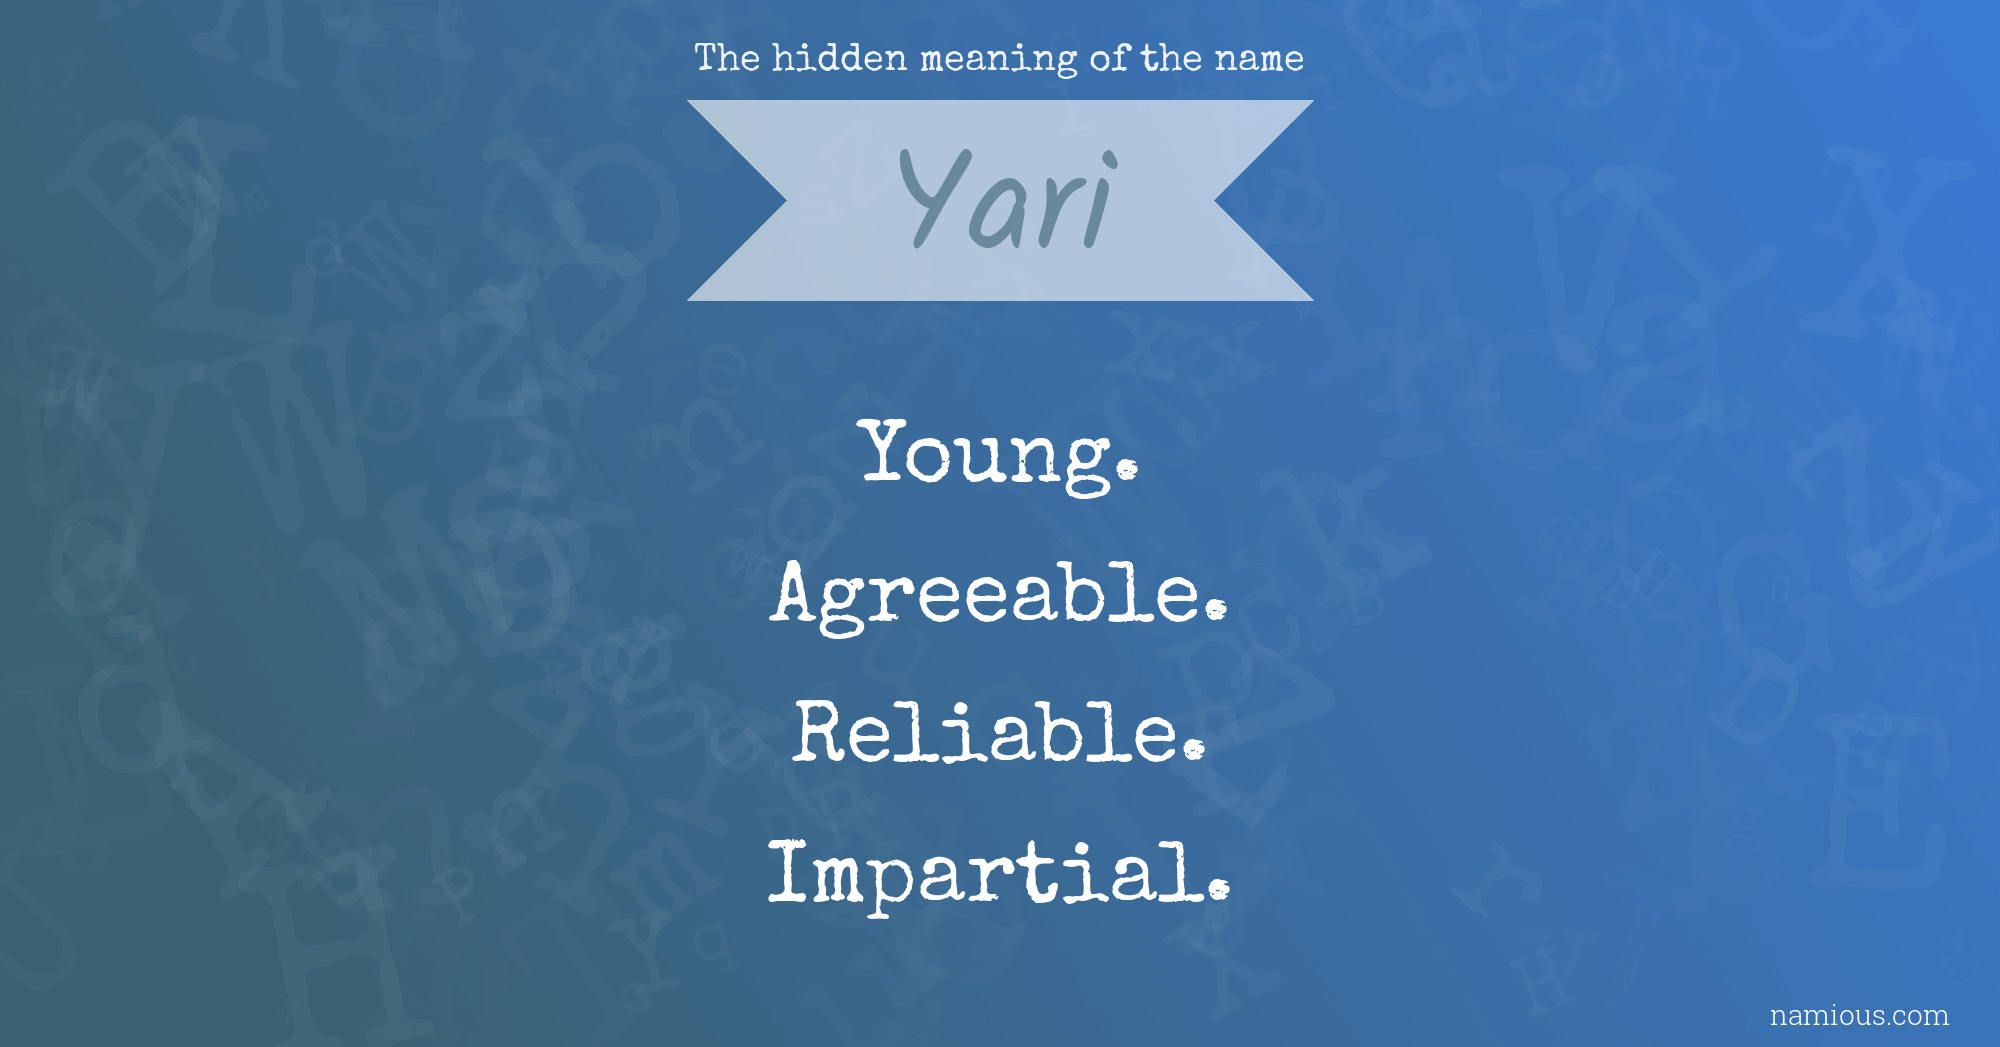 The hidden meaning of the name Yari